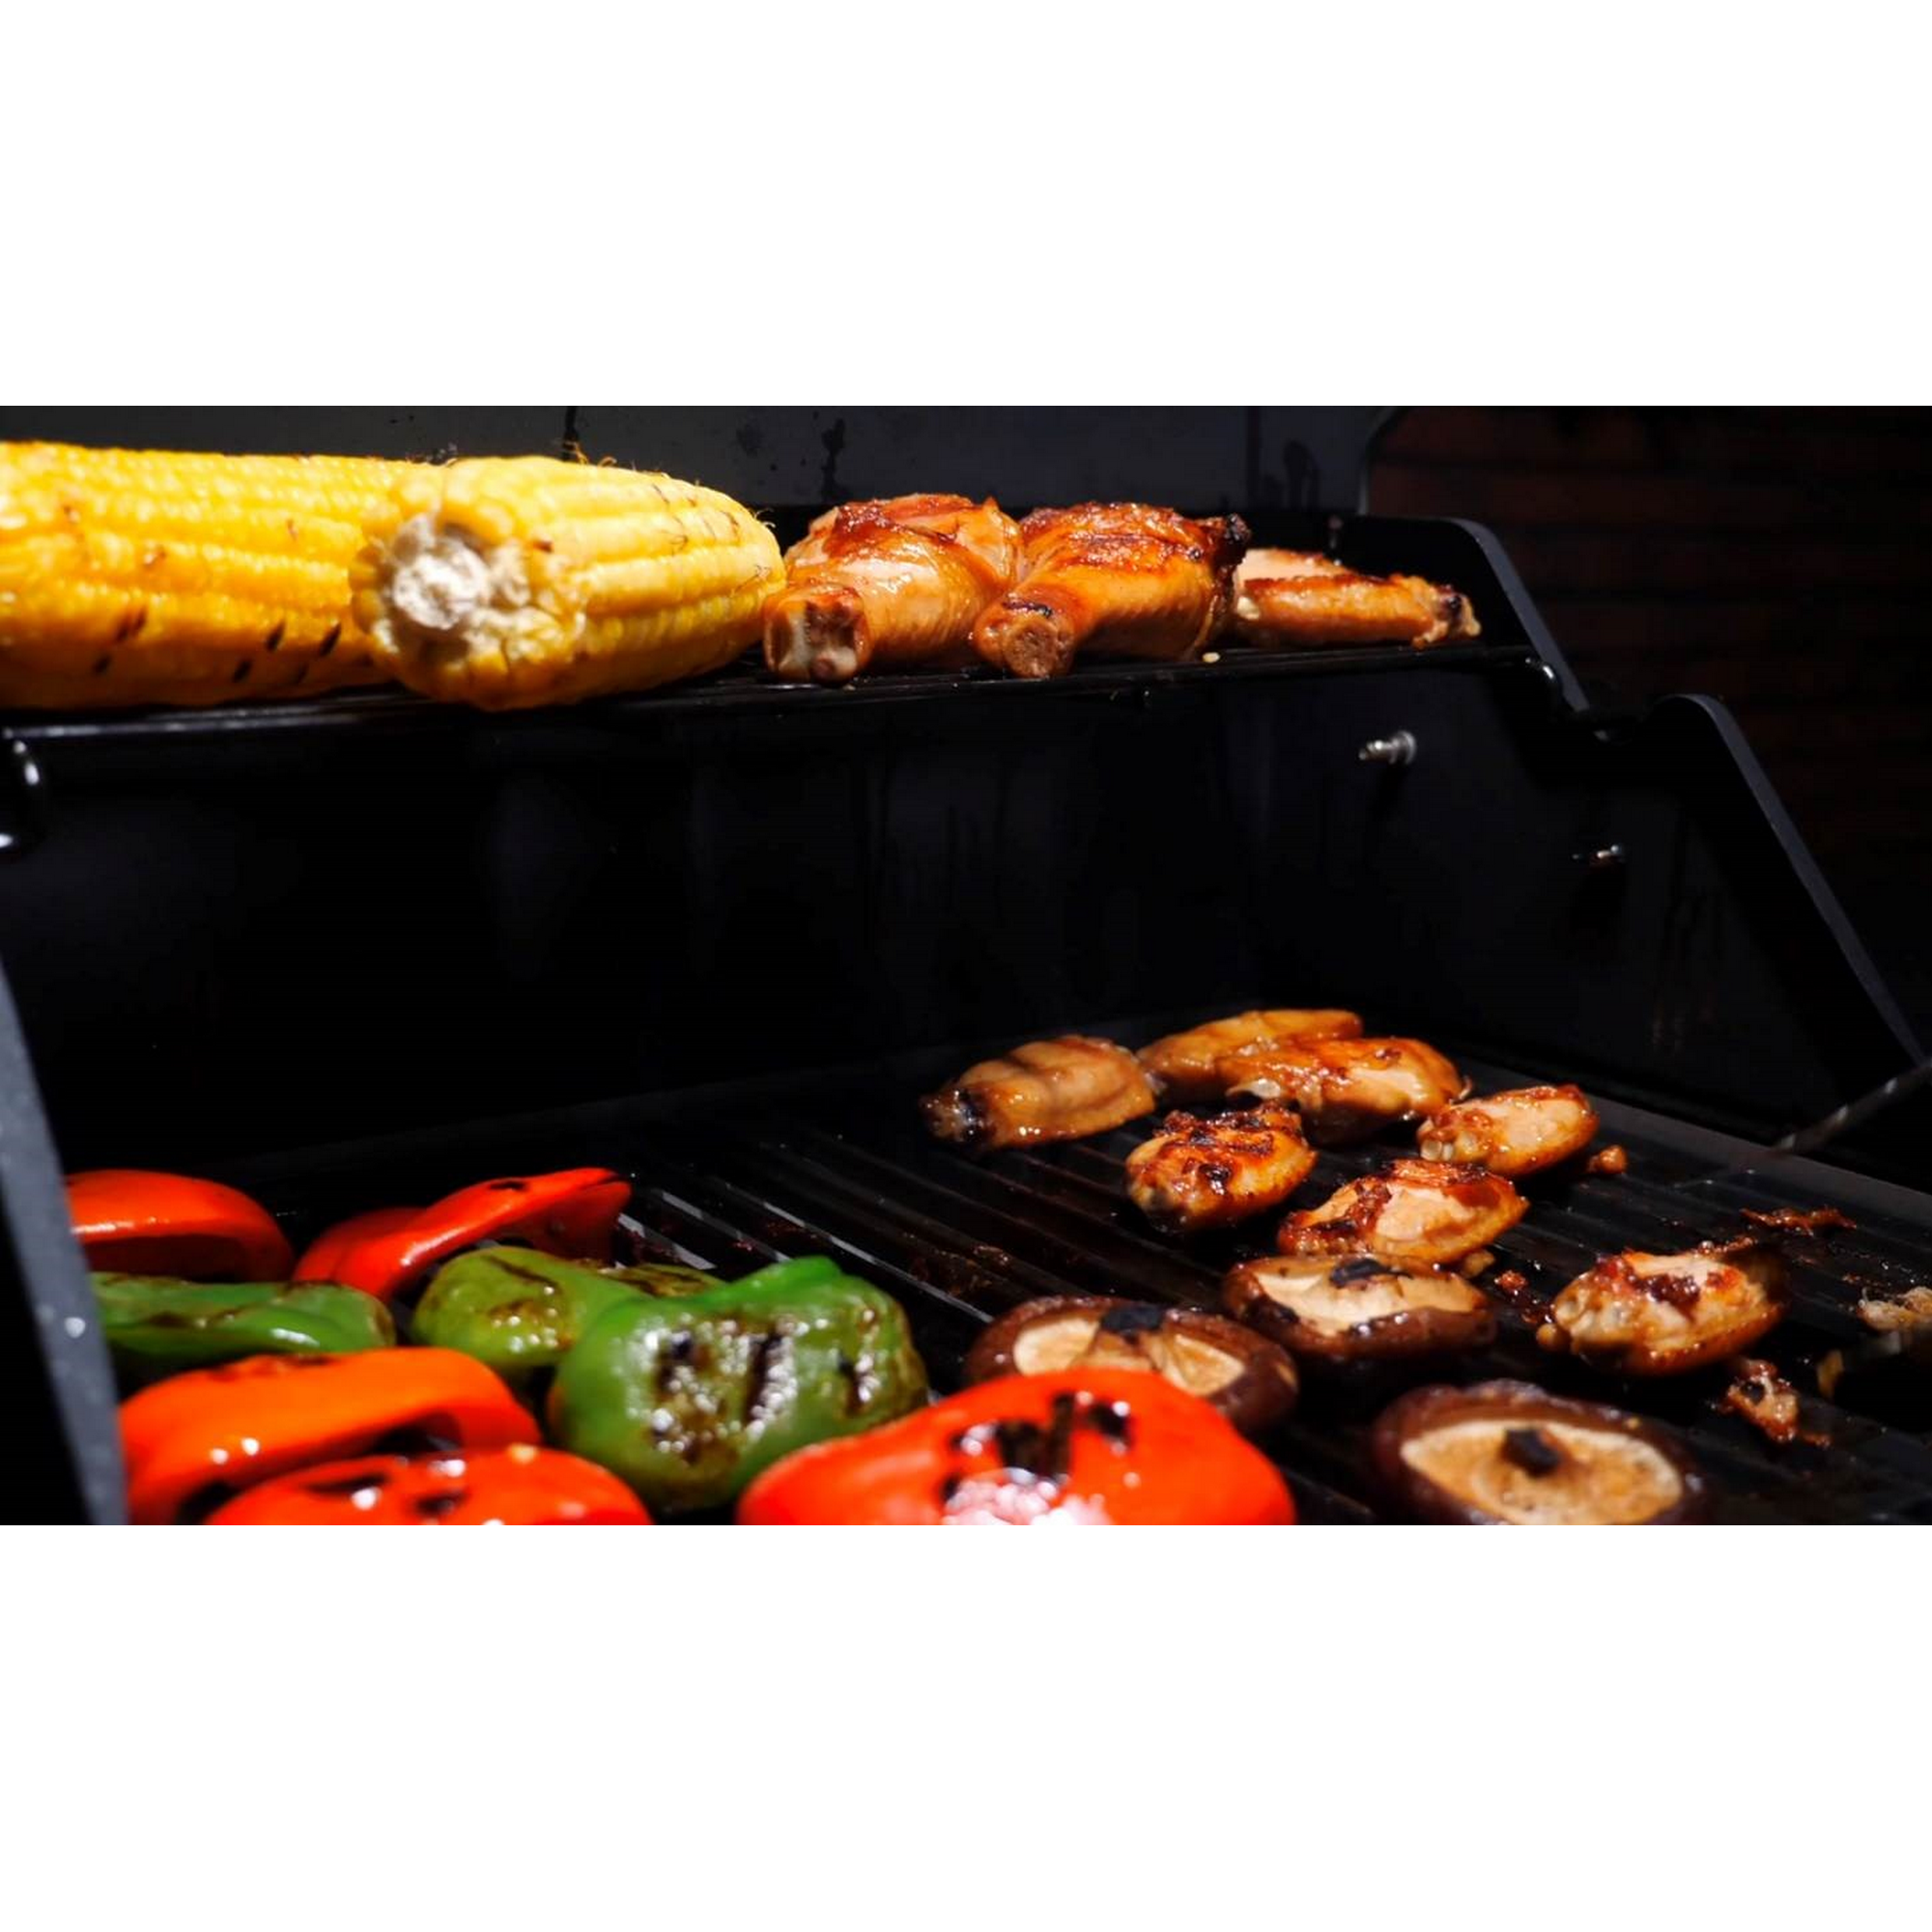 Elektrogrill 'Grenada' anthrazit 2-Brenner, 122 x 112 x 58,5 cm + product picture